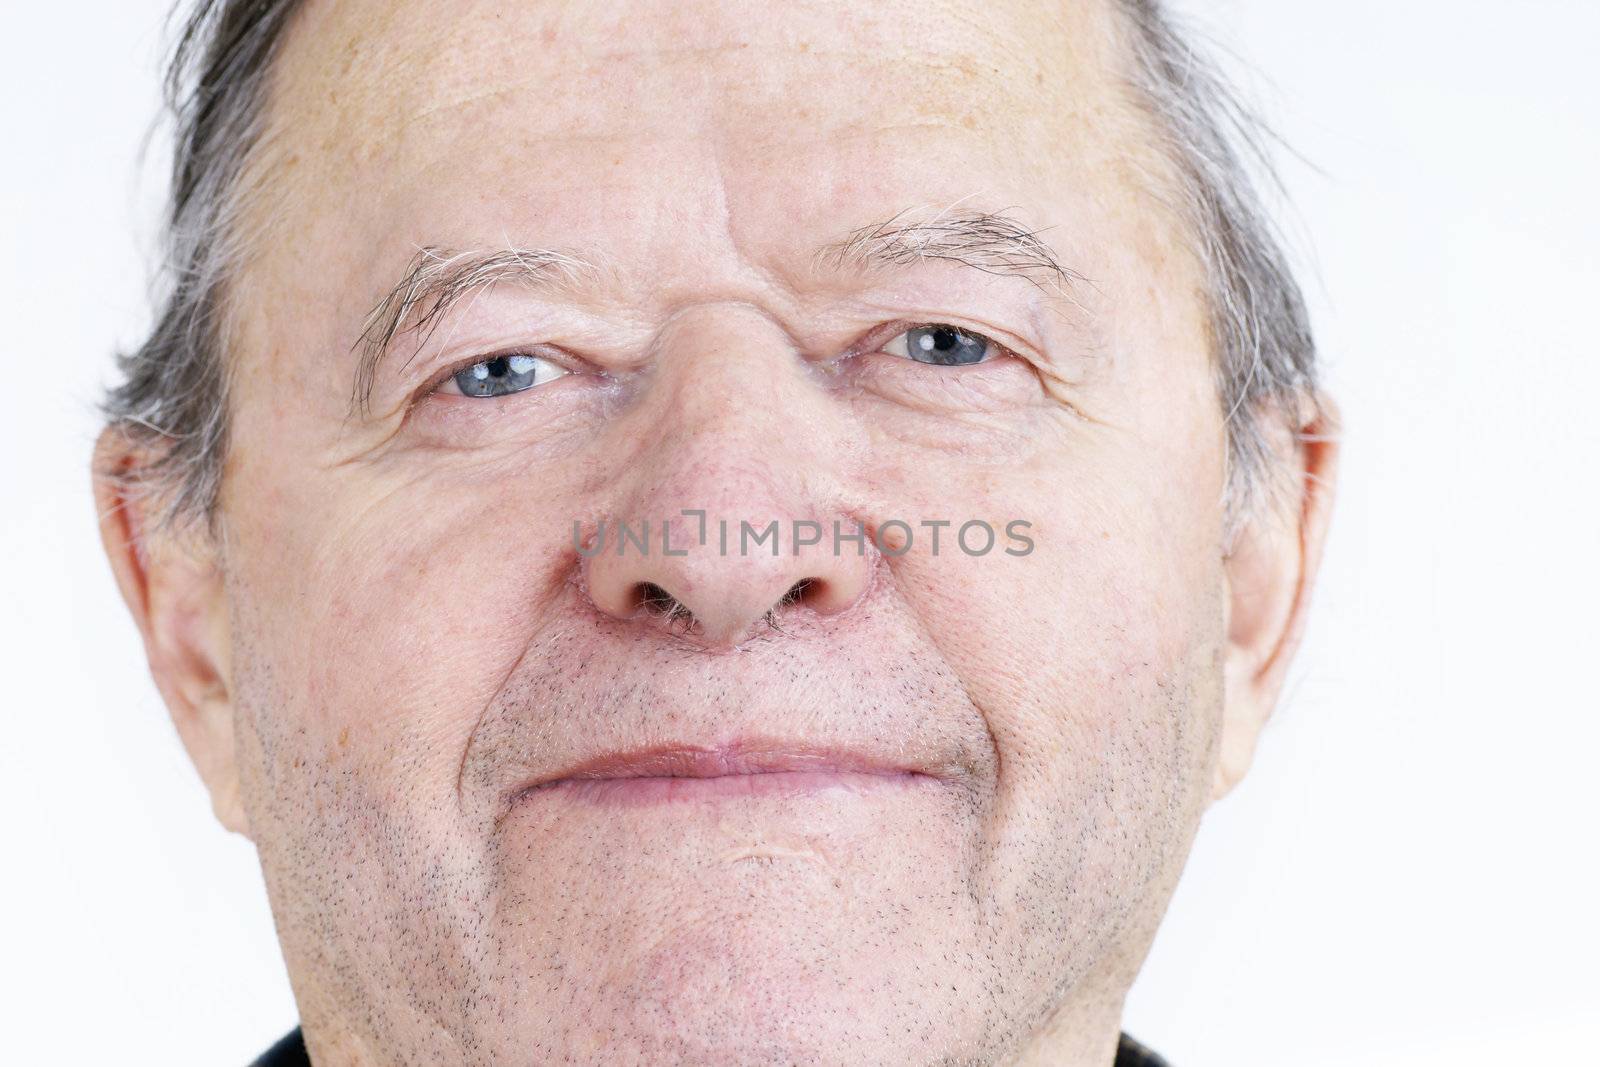 Candid portrait of real person, a smiling senior citizen or old man, no retouching great details.